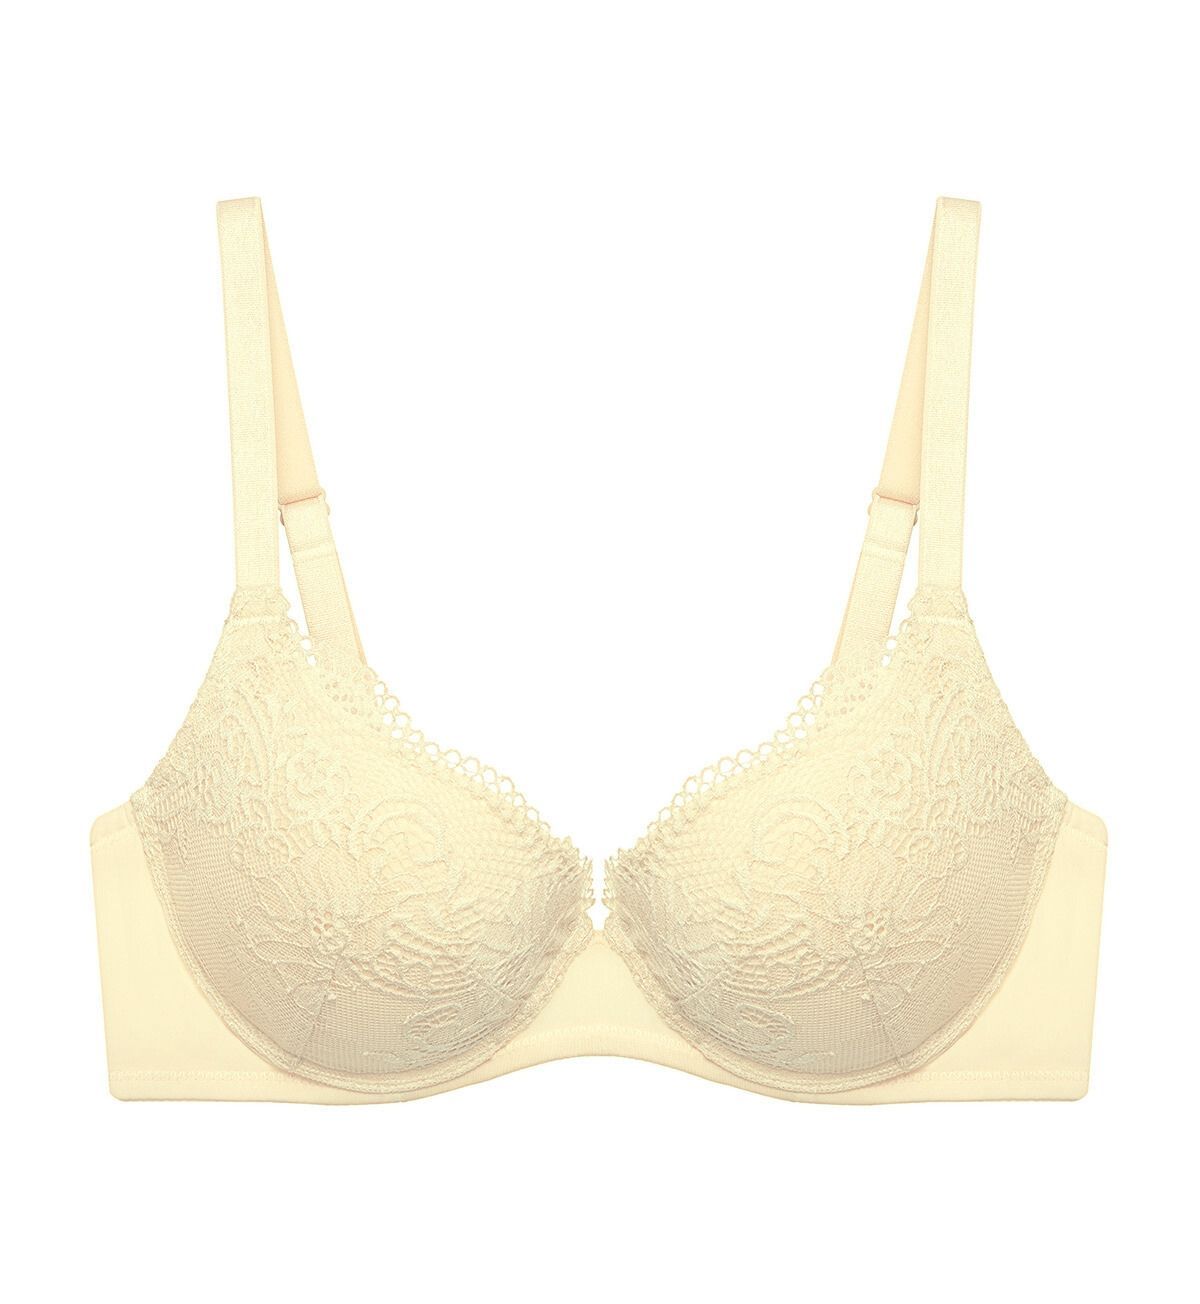 Wired Bras, Triumph, Simply Style Larkspur Wired Push Up Deep V Bra